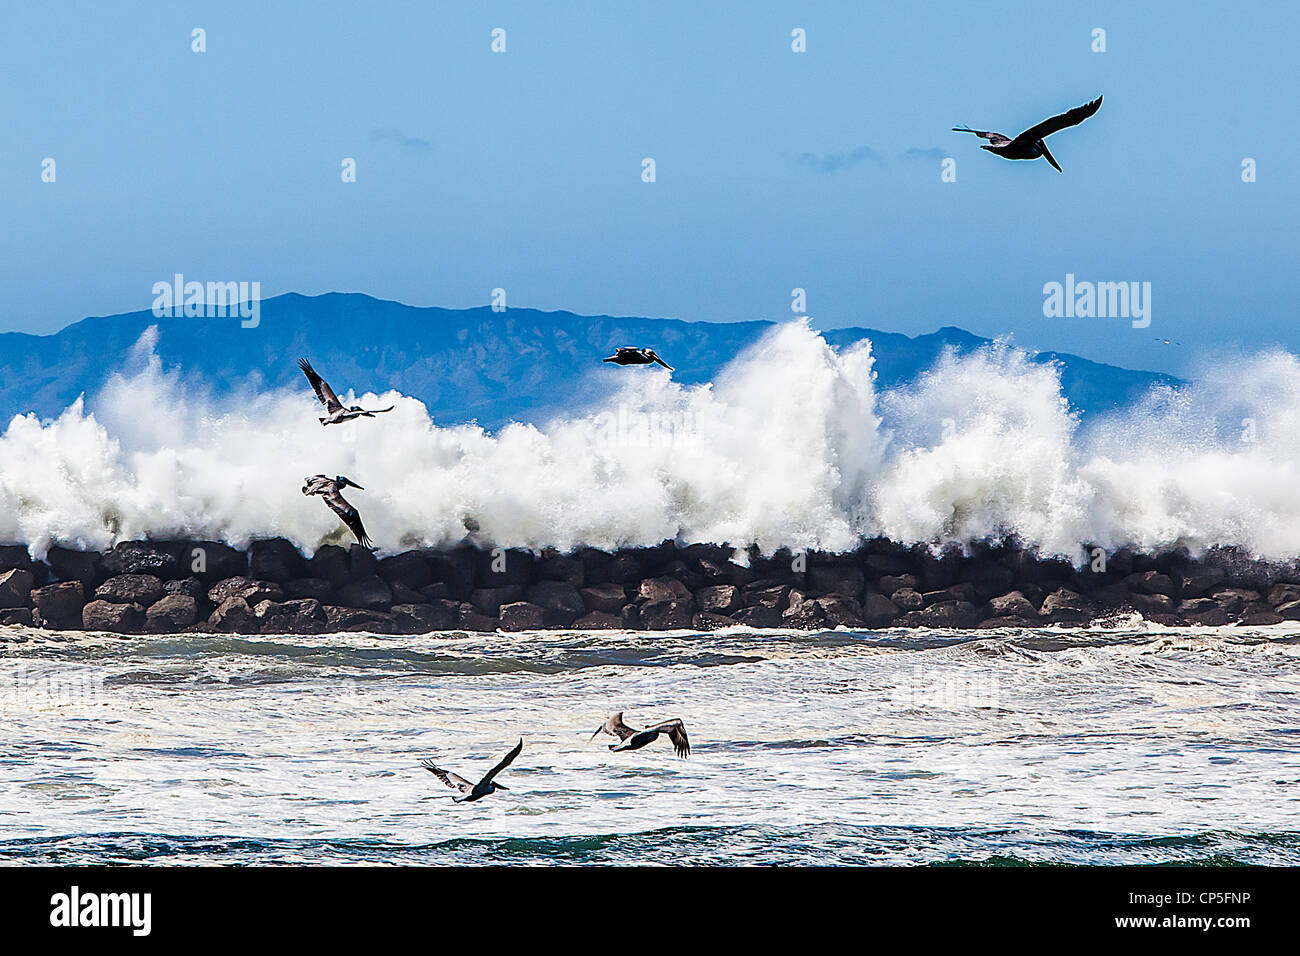 high-wind-and-waves-crashing-on-the-breakwater-and-jetty-in-oxnard-CP5FNP.jpg